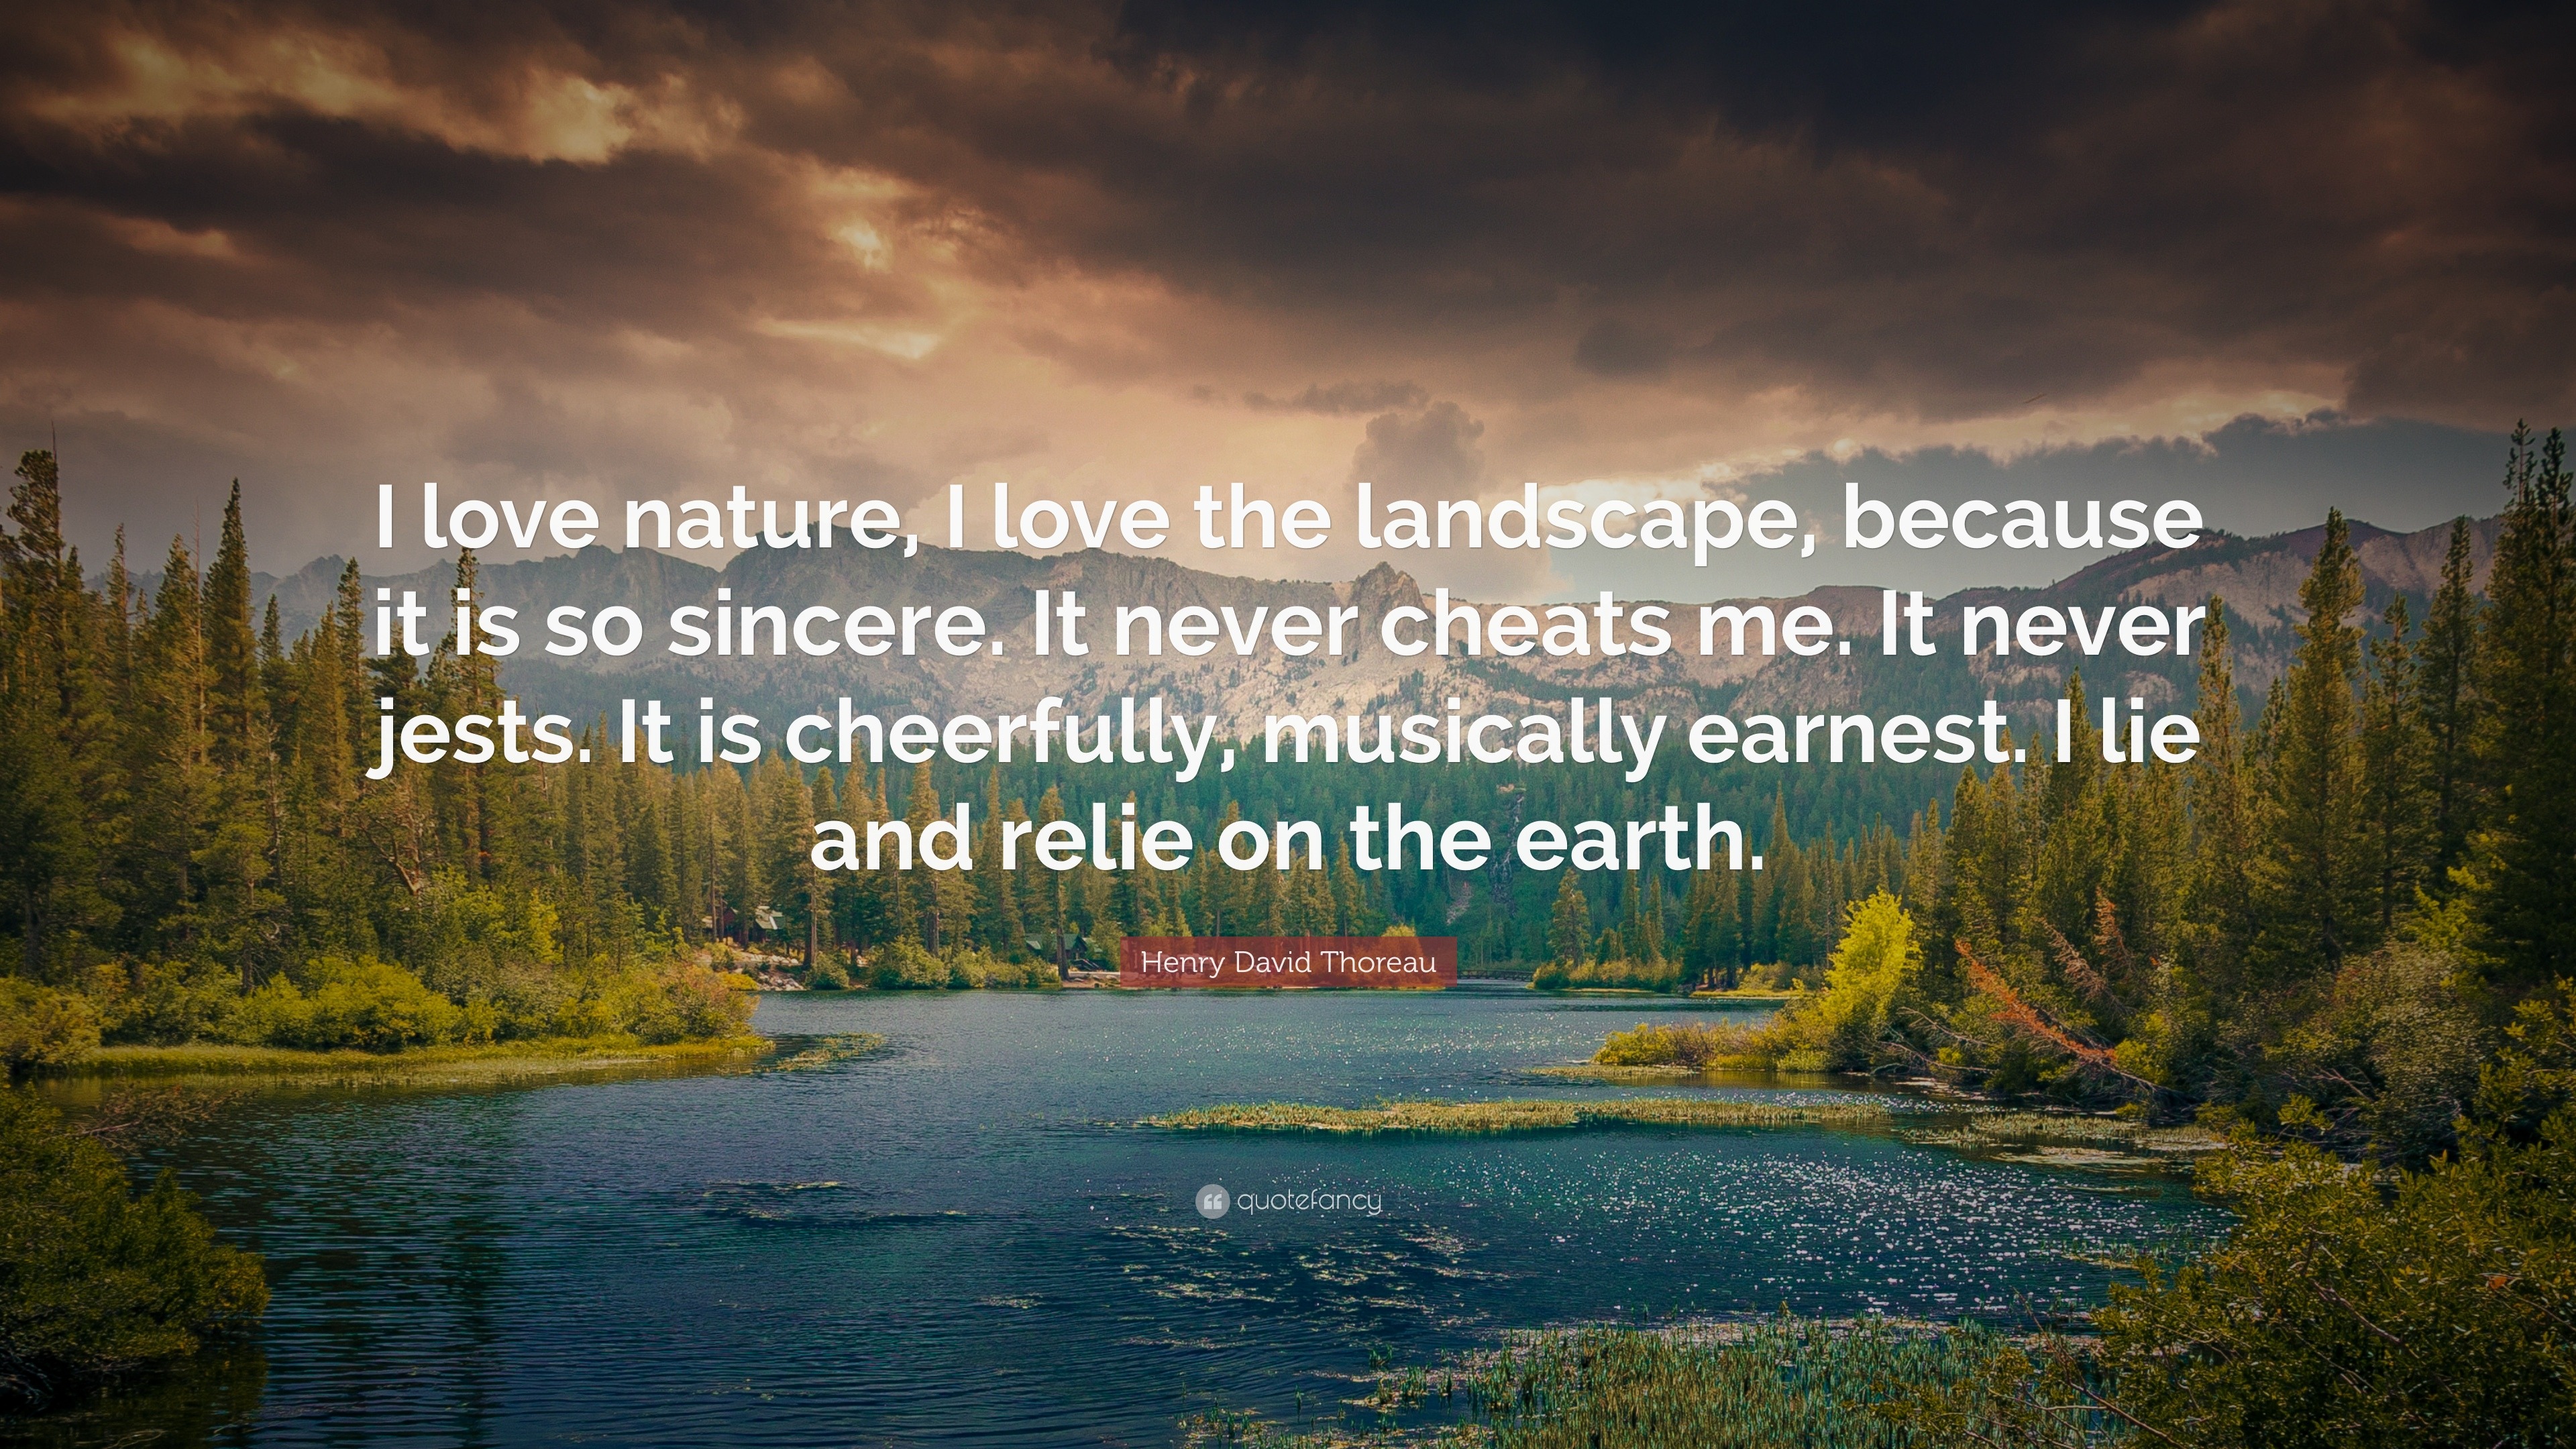 Henry David Thoreau Quote: “I love nature, I love the landscape, because it is so sincere. never cheats me. It never jests. It is cheerfully, mus...”